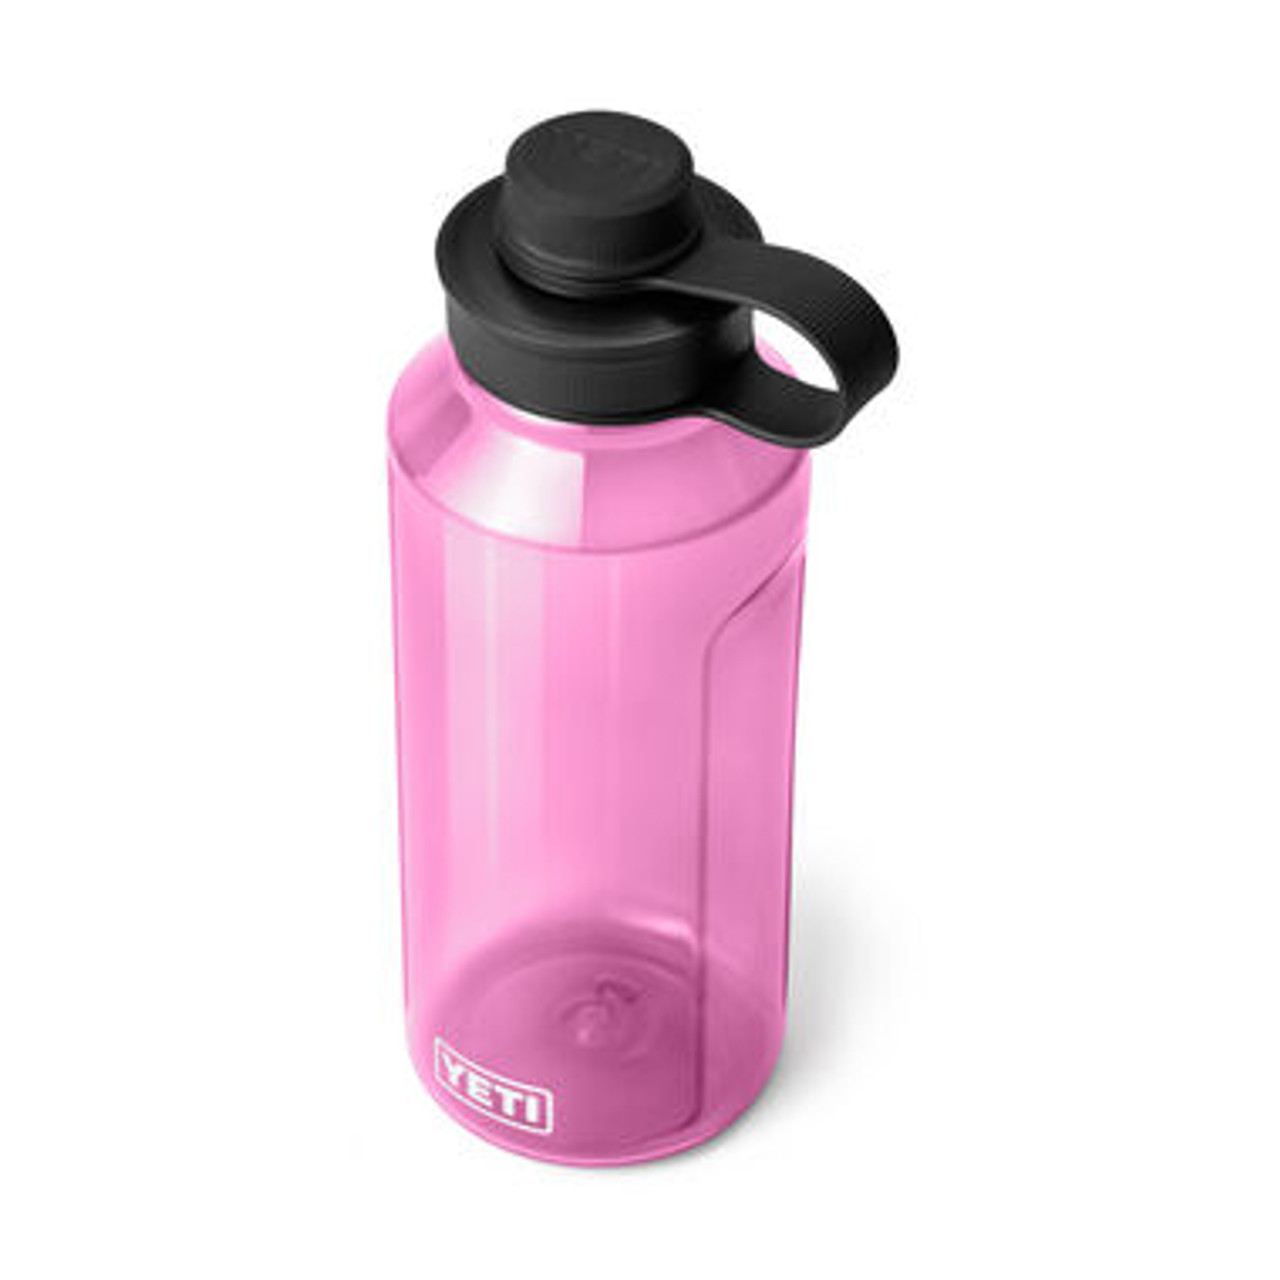 https://cdn11.bigcommerce.com/s-u13xztxgtc/images/stencil/1280x1280/products/21683/35075/yeti-yonder-15-l50-oz-water-bottle-with-chug-cap-power-pink-21071502498-detail-view-7__66944.1696426623.jpg?c=1